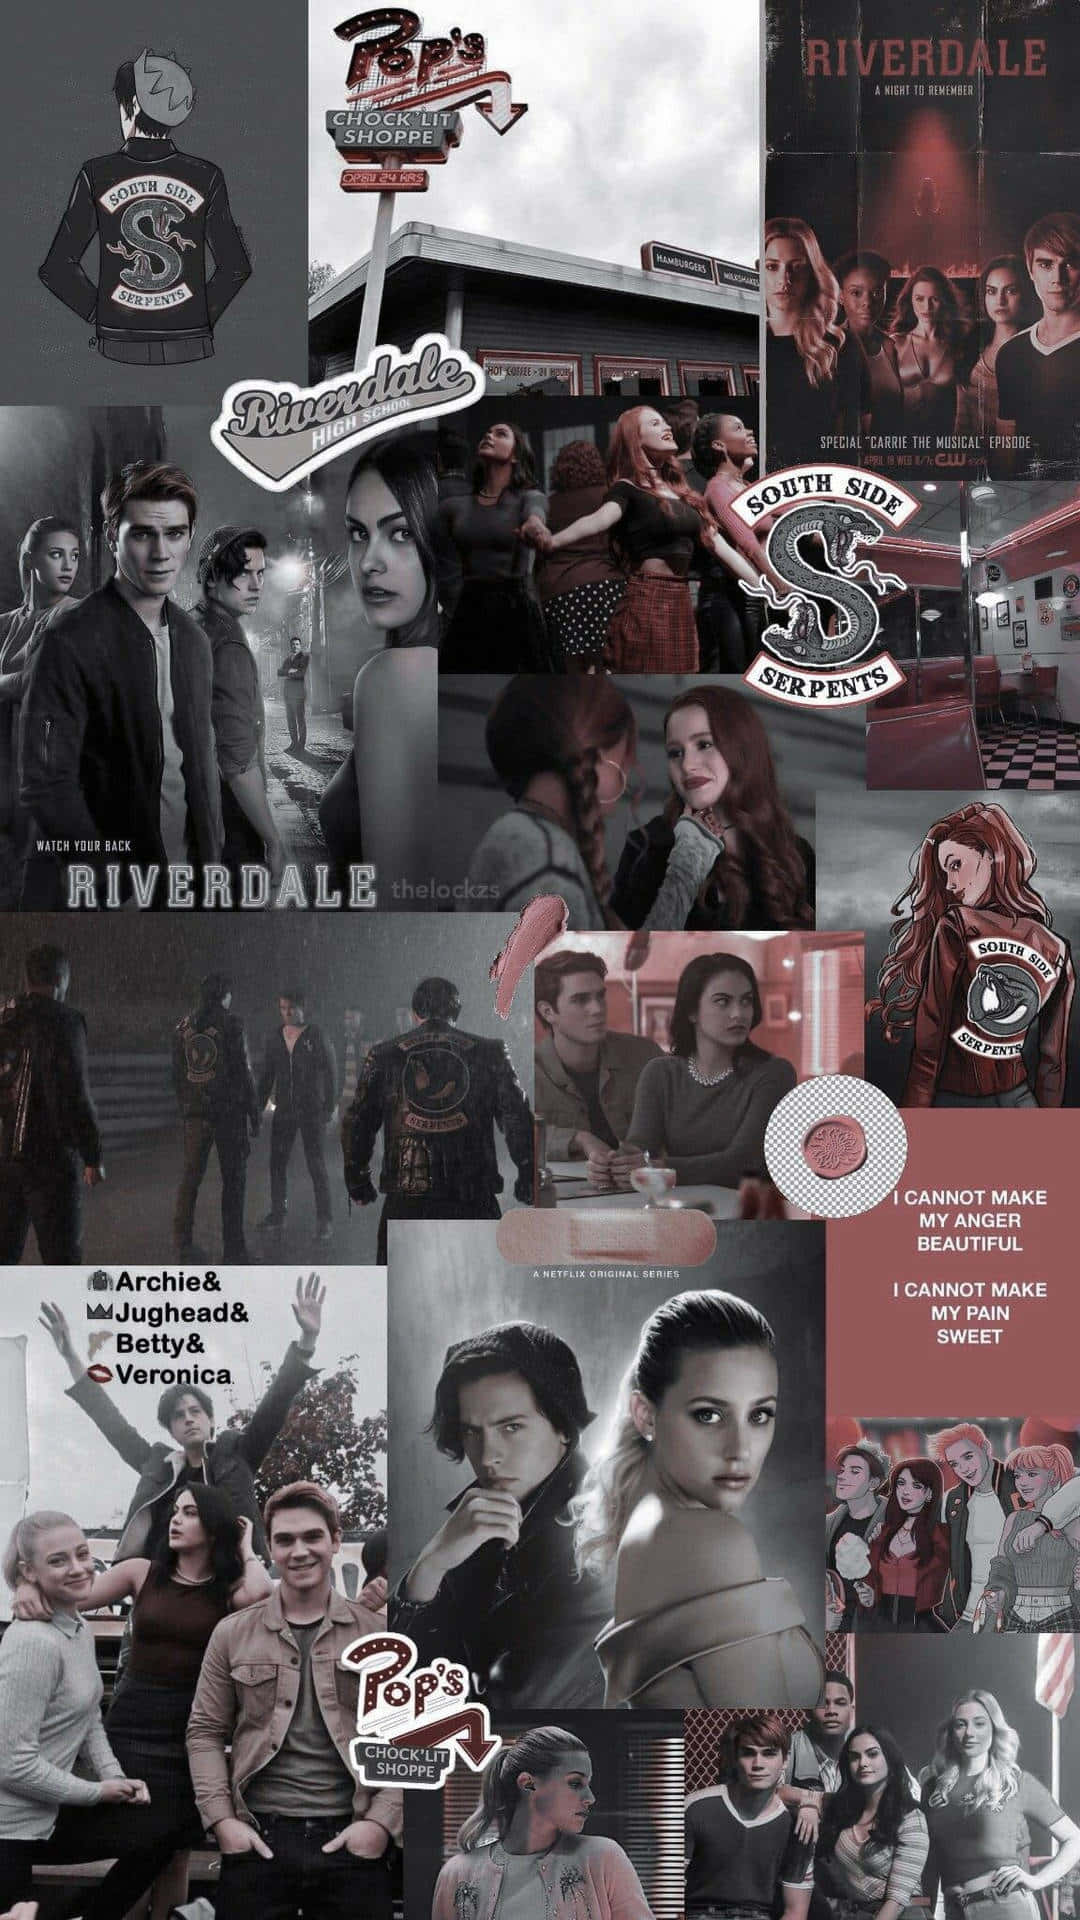 Riverdale Cast: Archie, Veronica, Betty, and Jughead